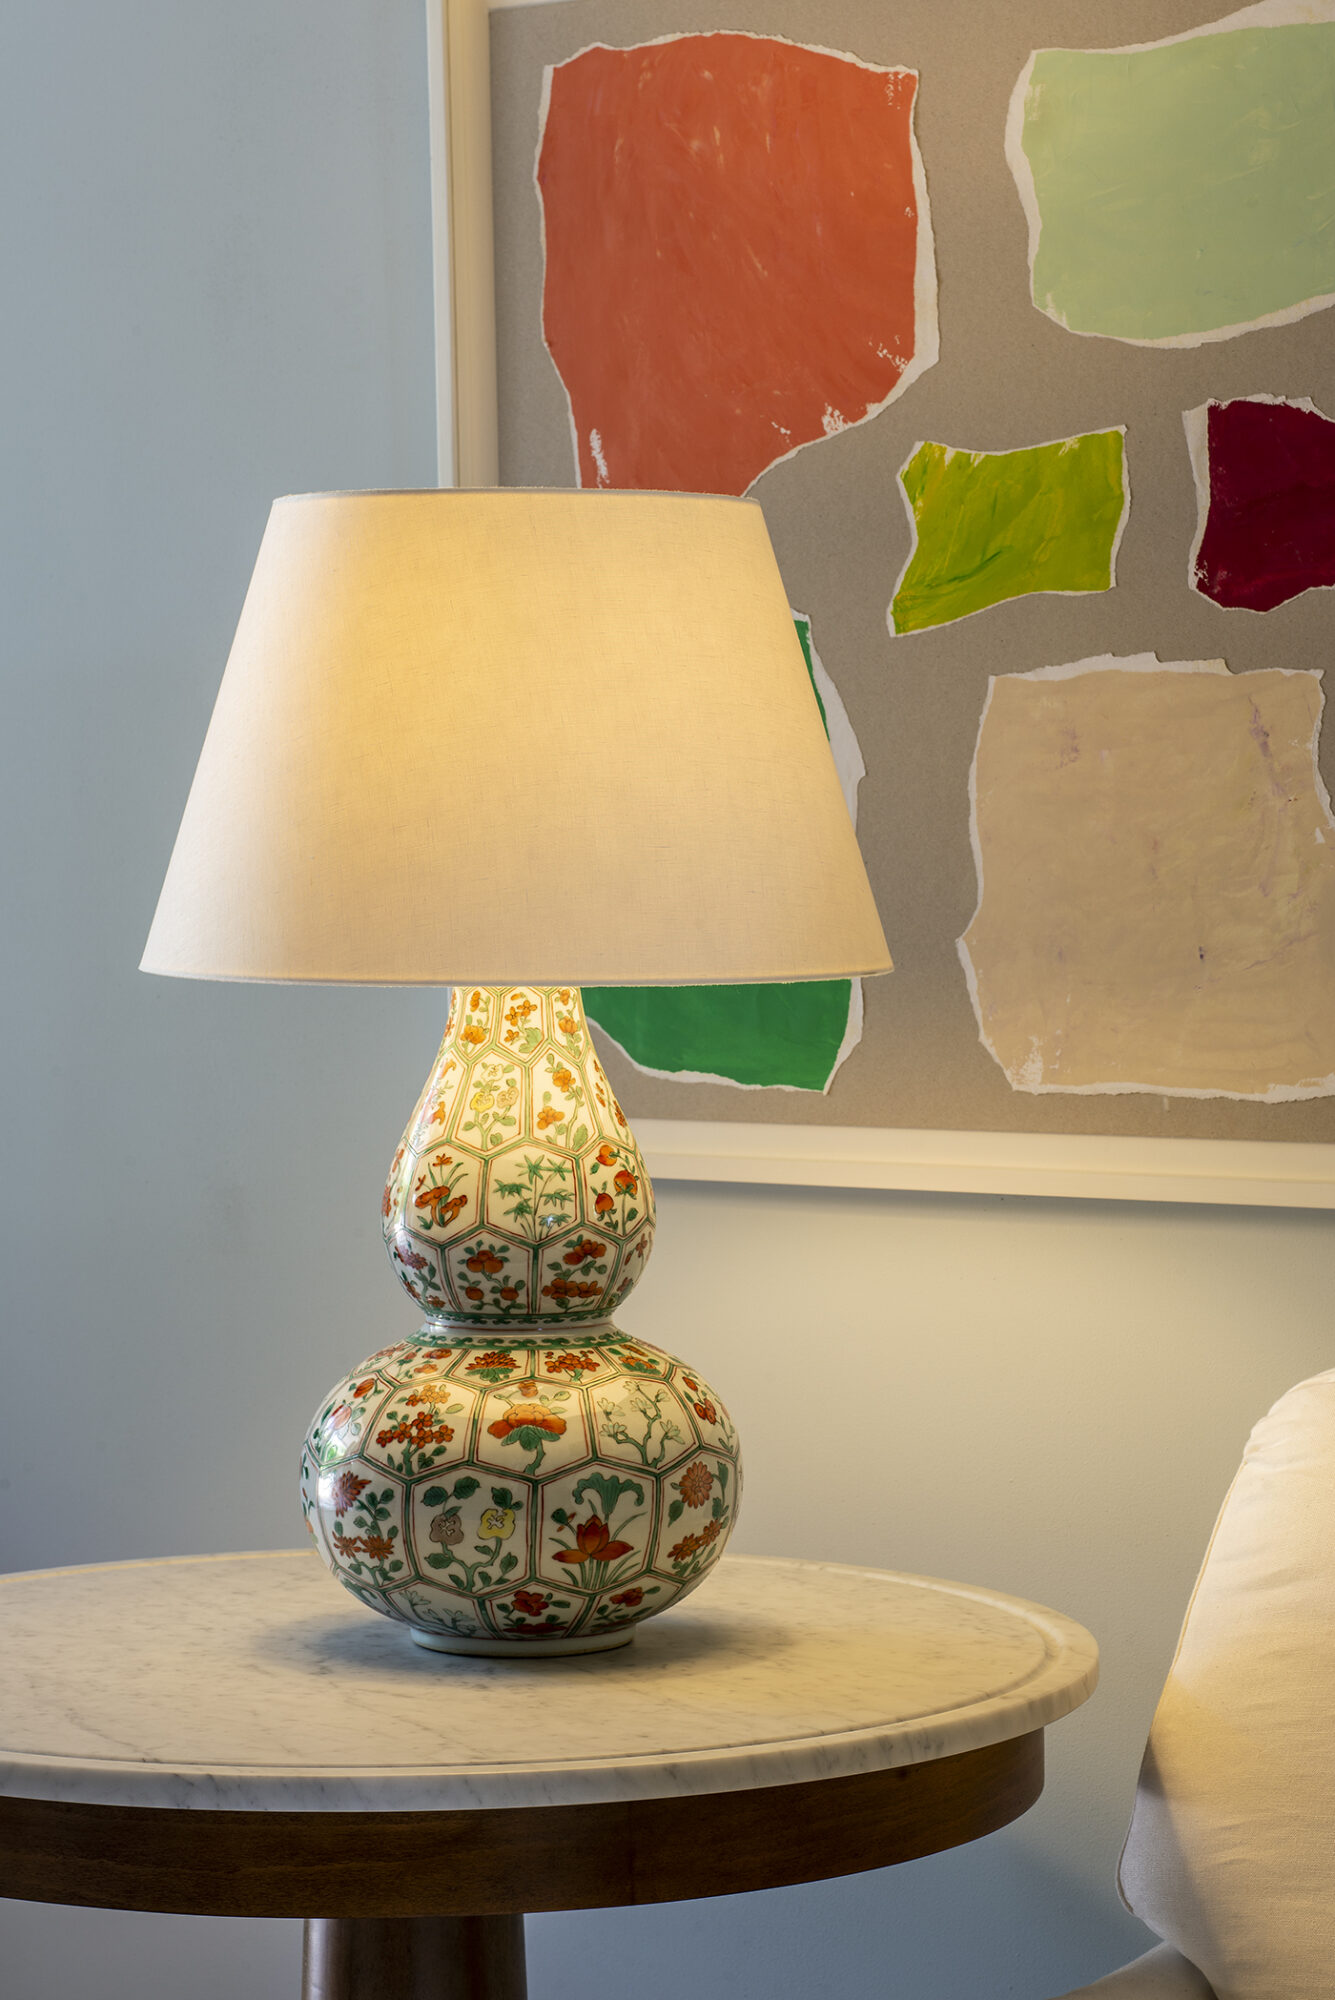 white lamp with a red floral and classic gourd shape base